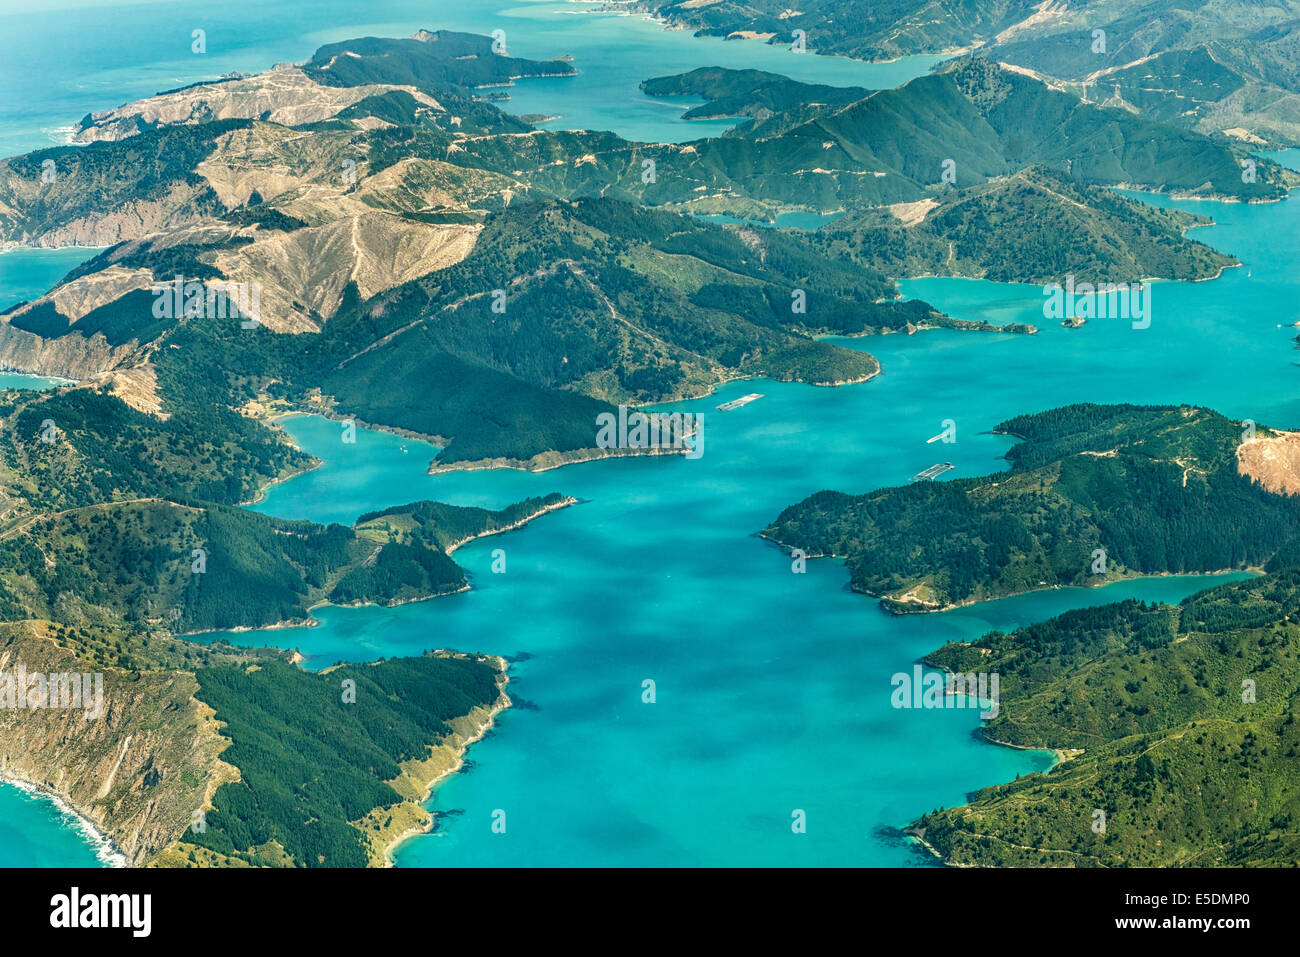 New Zealand, South Island, Marlborough Sounds, aerial photograph of the fjords near Queen Charlotte Sound Stock Photo